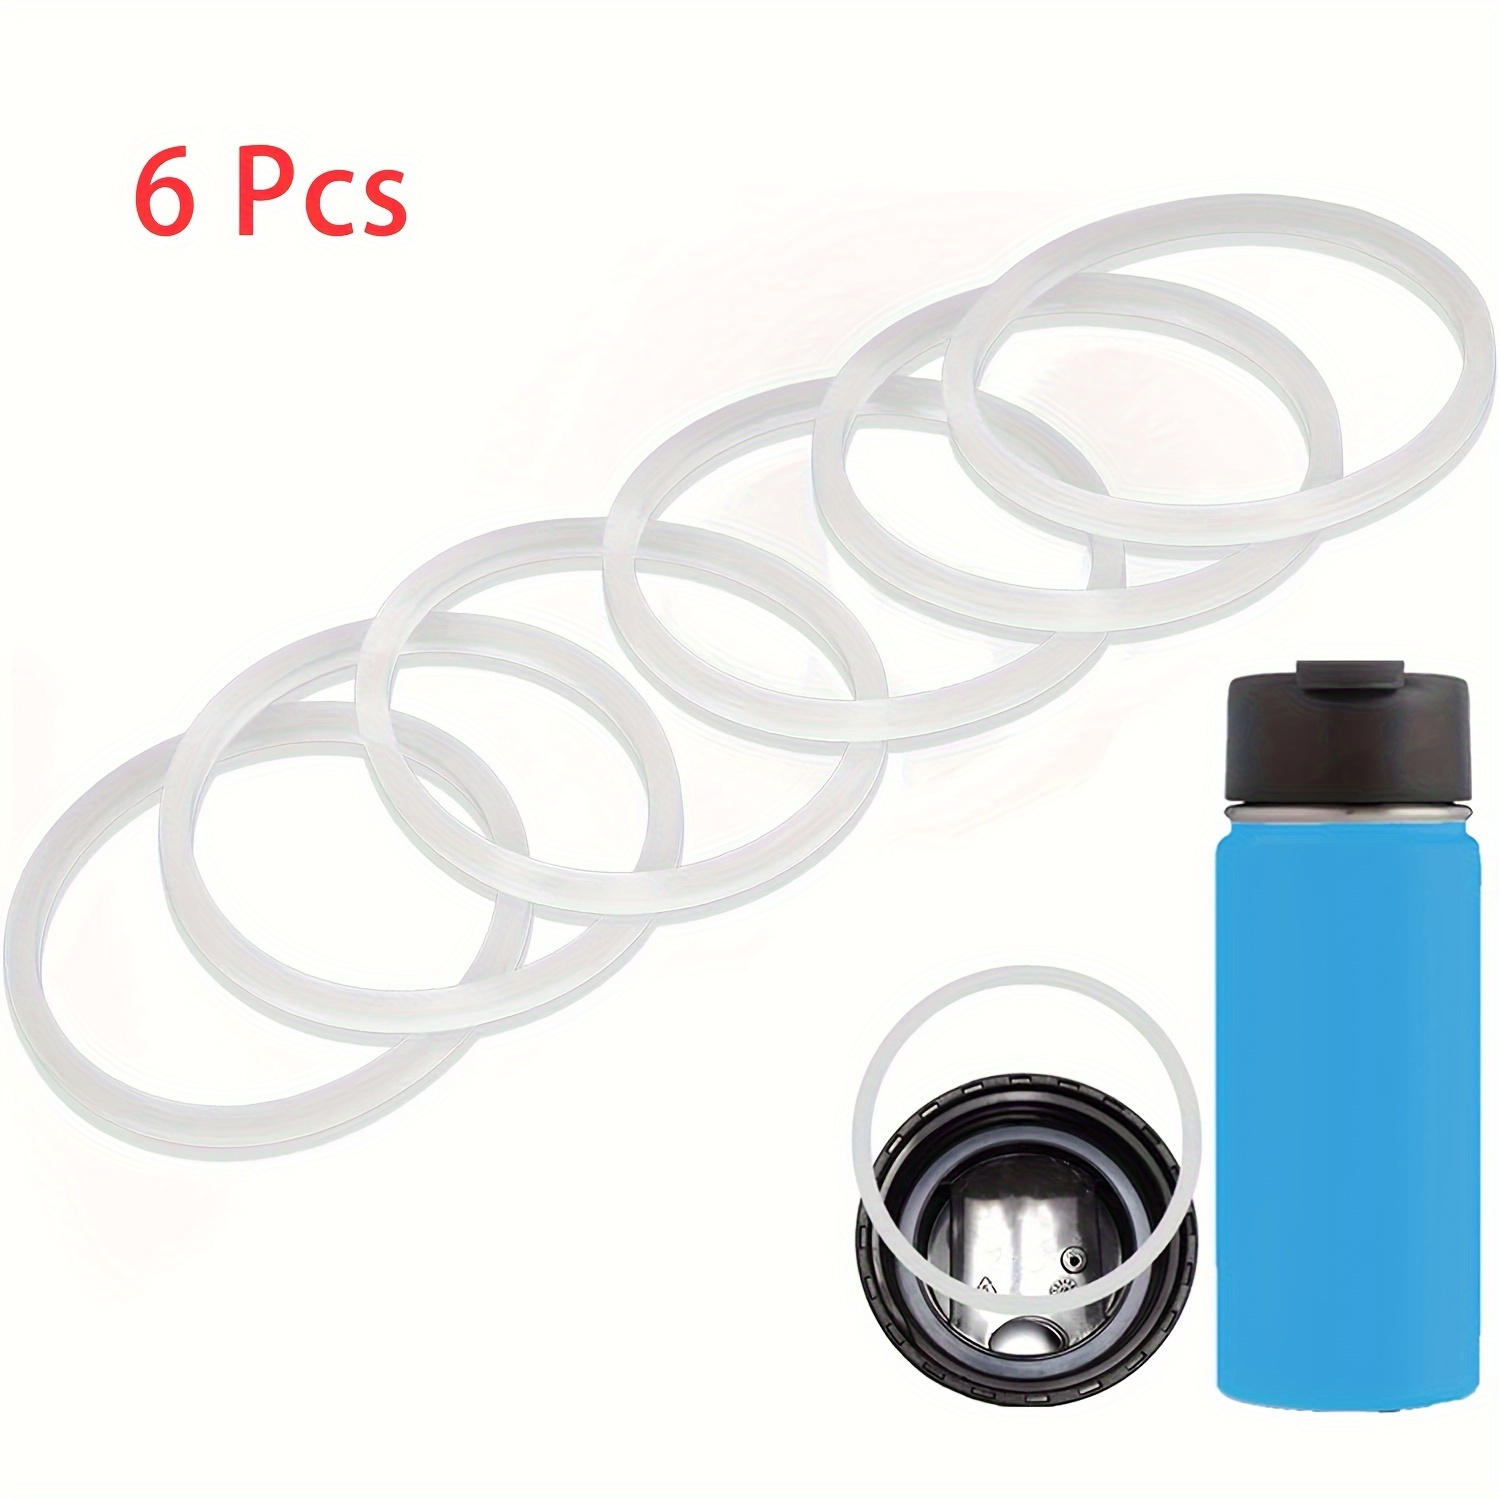 Silicon Water Bottle Rubber Seal ring